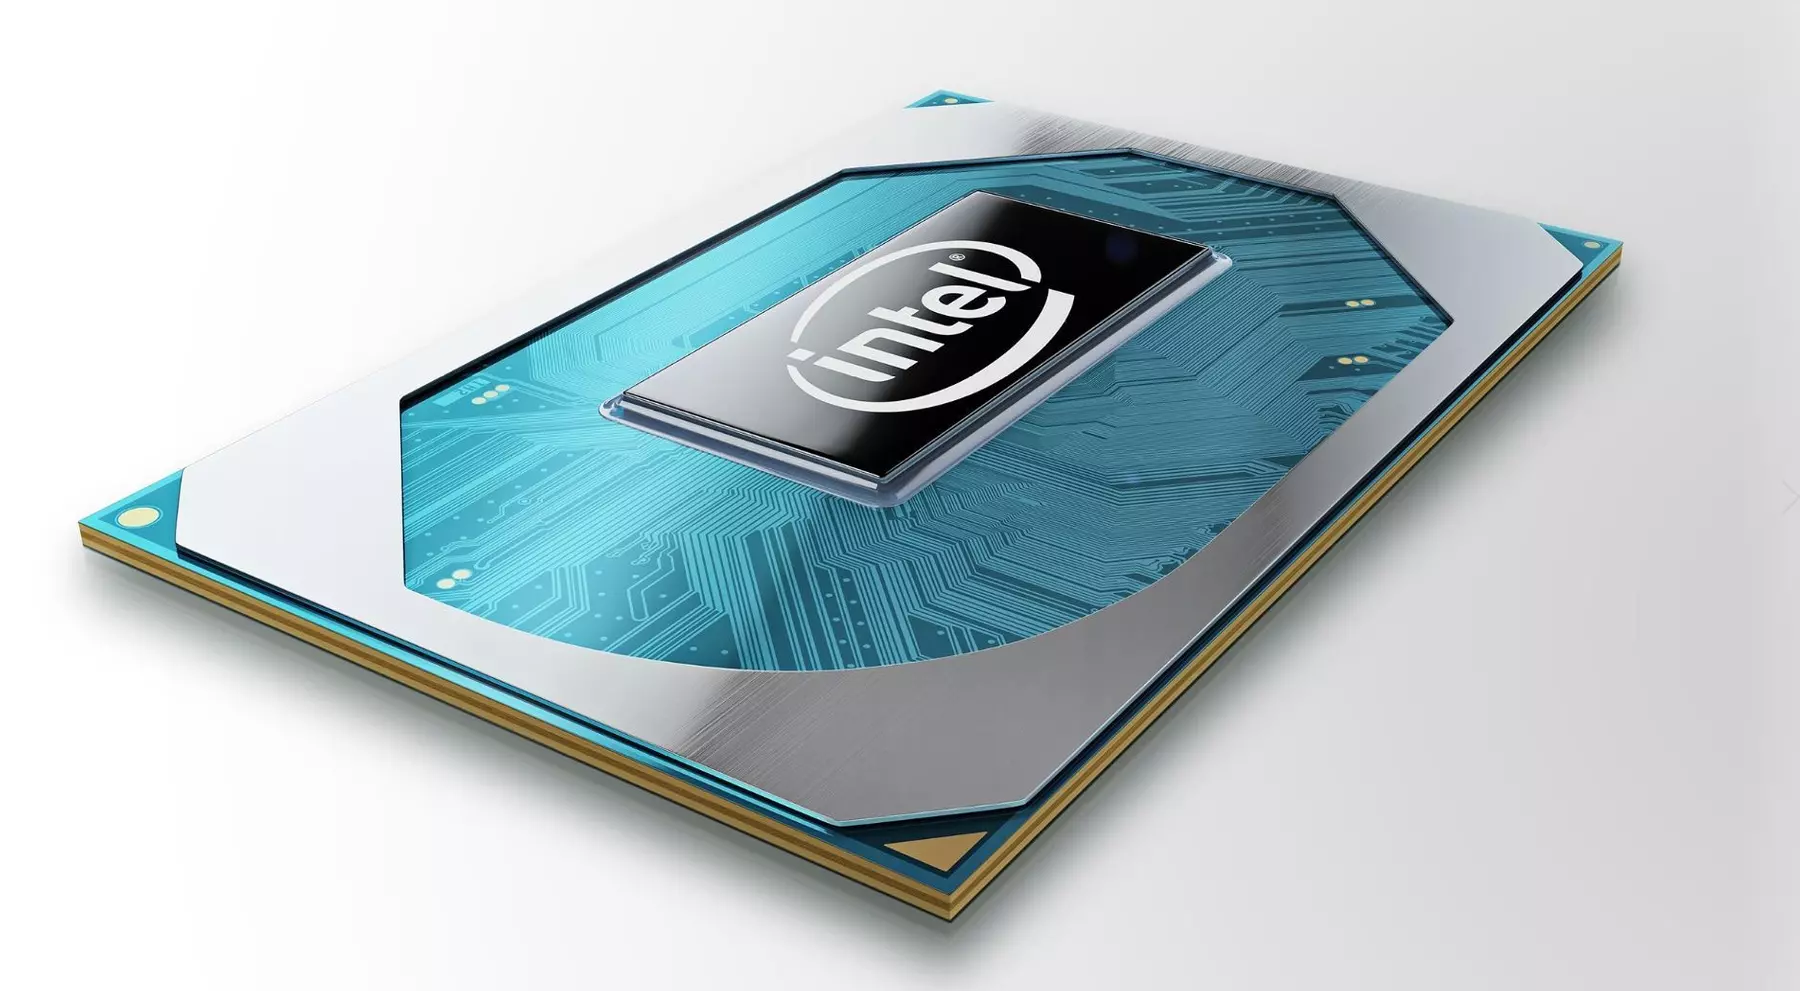 chip production technology Intel